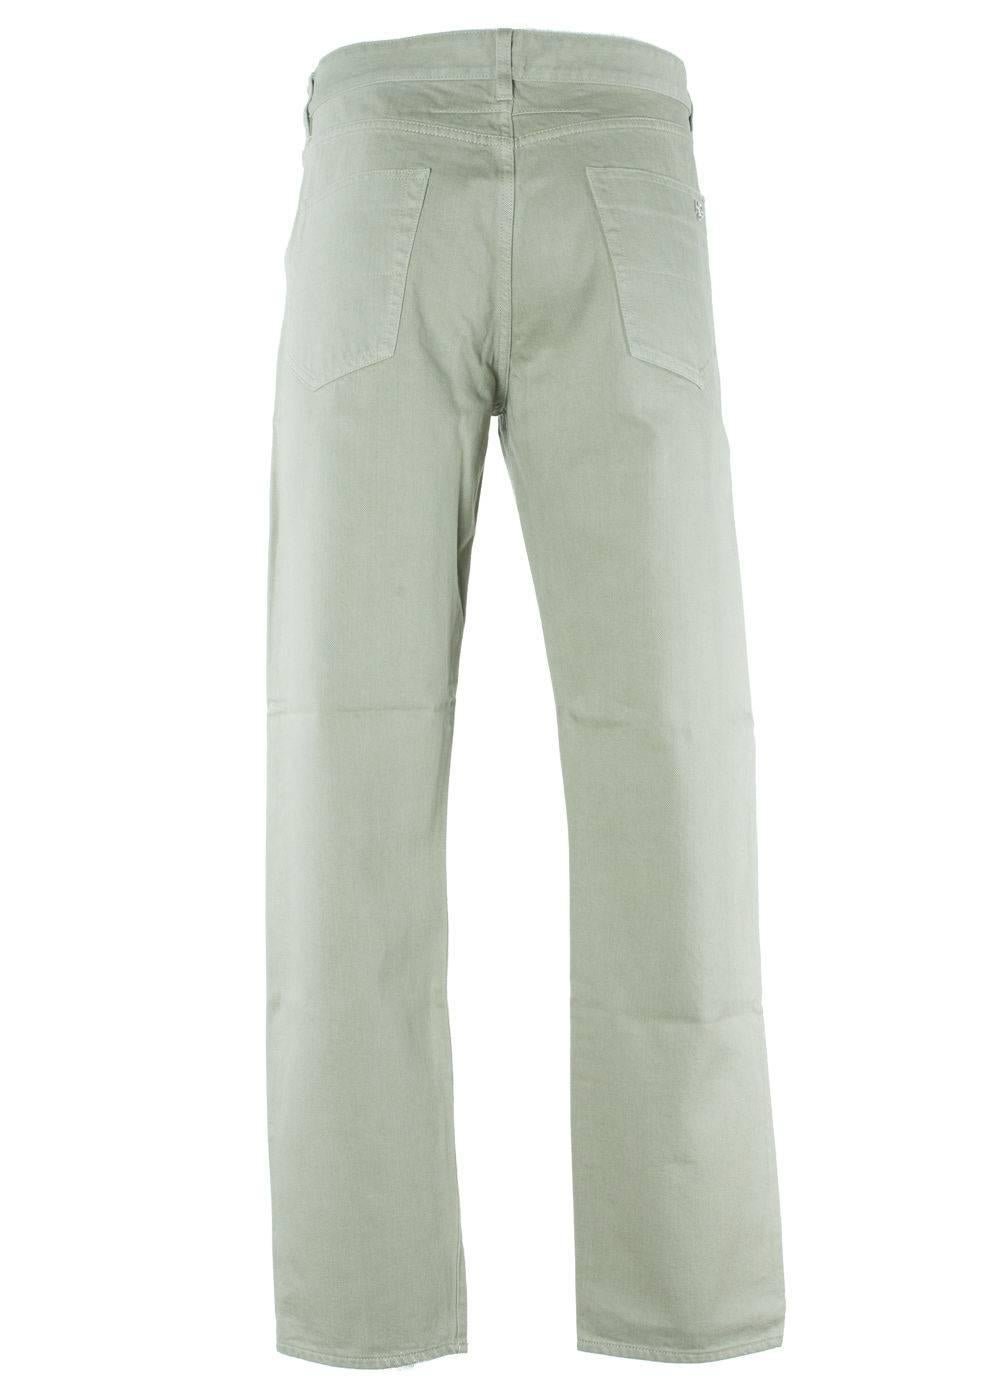 Brand New Givenchy Men's Corduroys
Original Tag
Retails in Stores & Online for $510
Men's Size US 34 Fits True to Size

Corduroy silhouette pants are a must have for any man's closet on all four season. These light olive corduroys are super